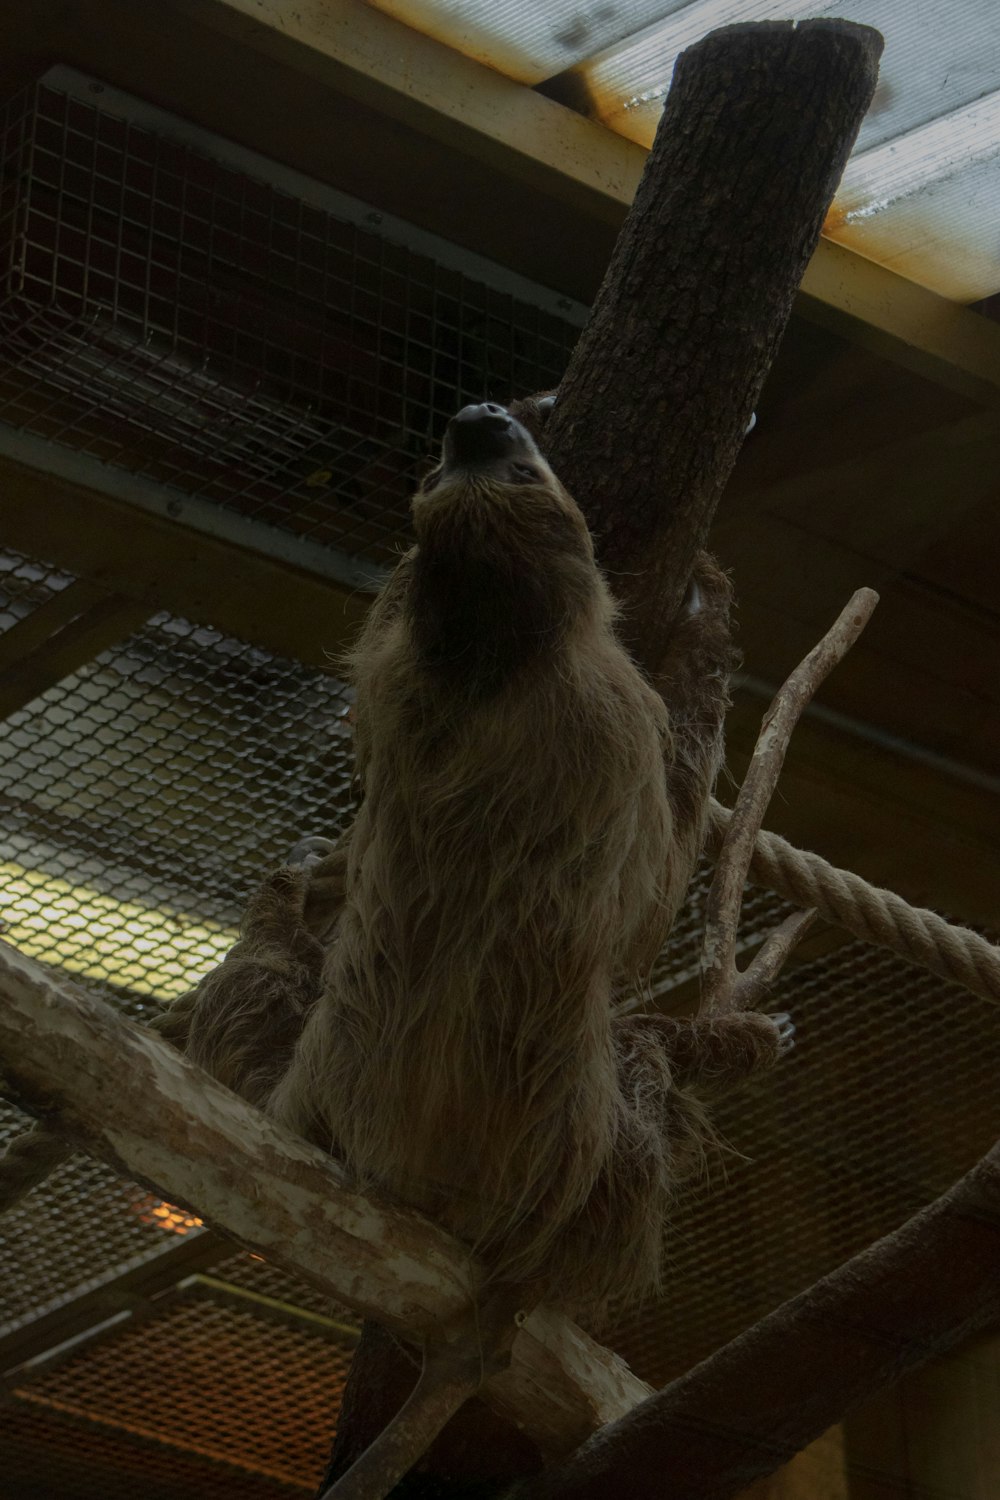 a sloth hanging from a tree branch in a cage